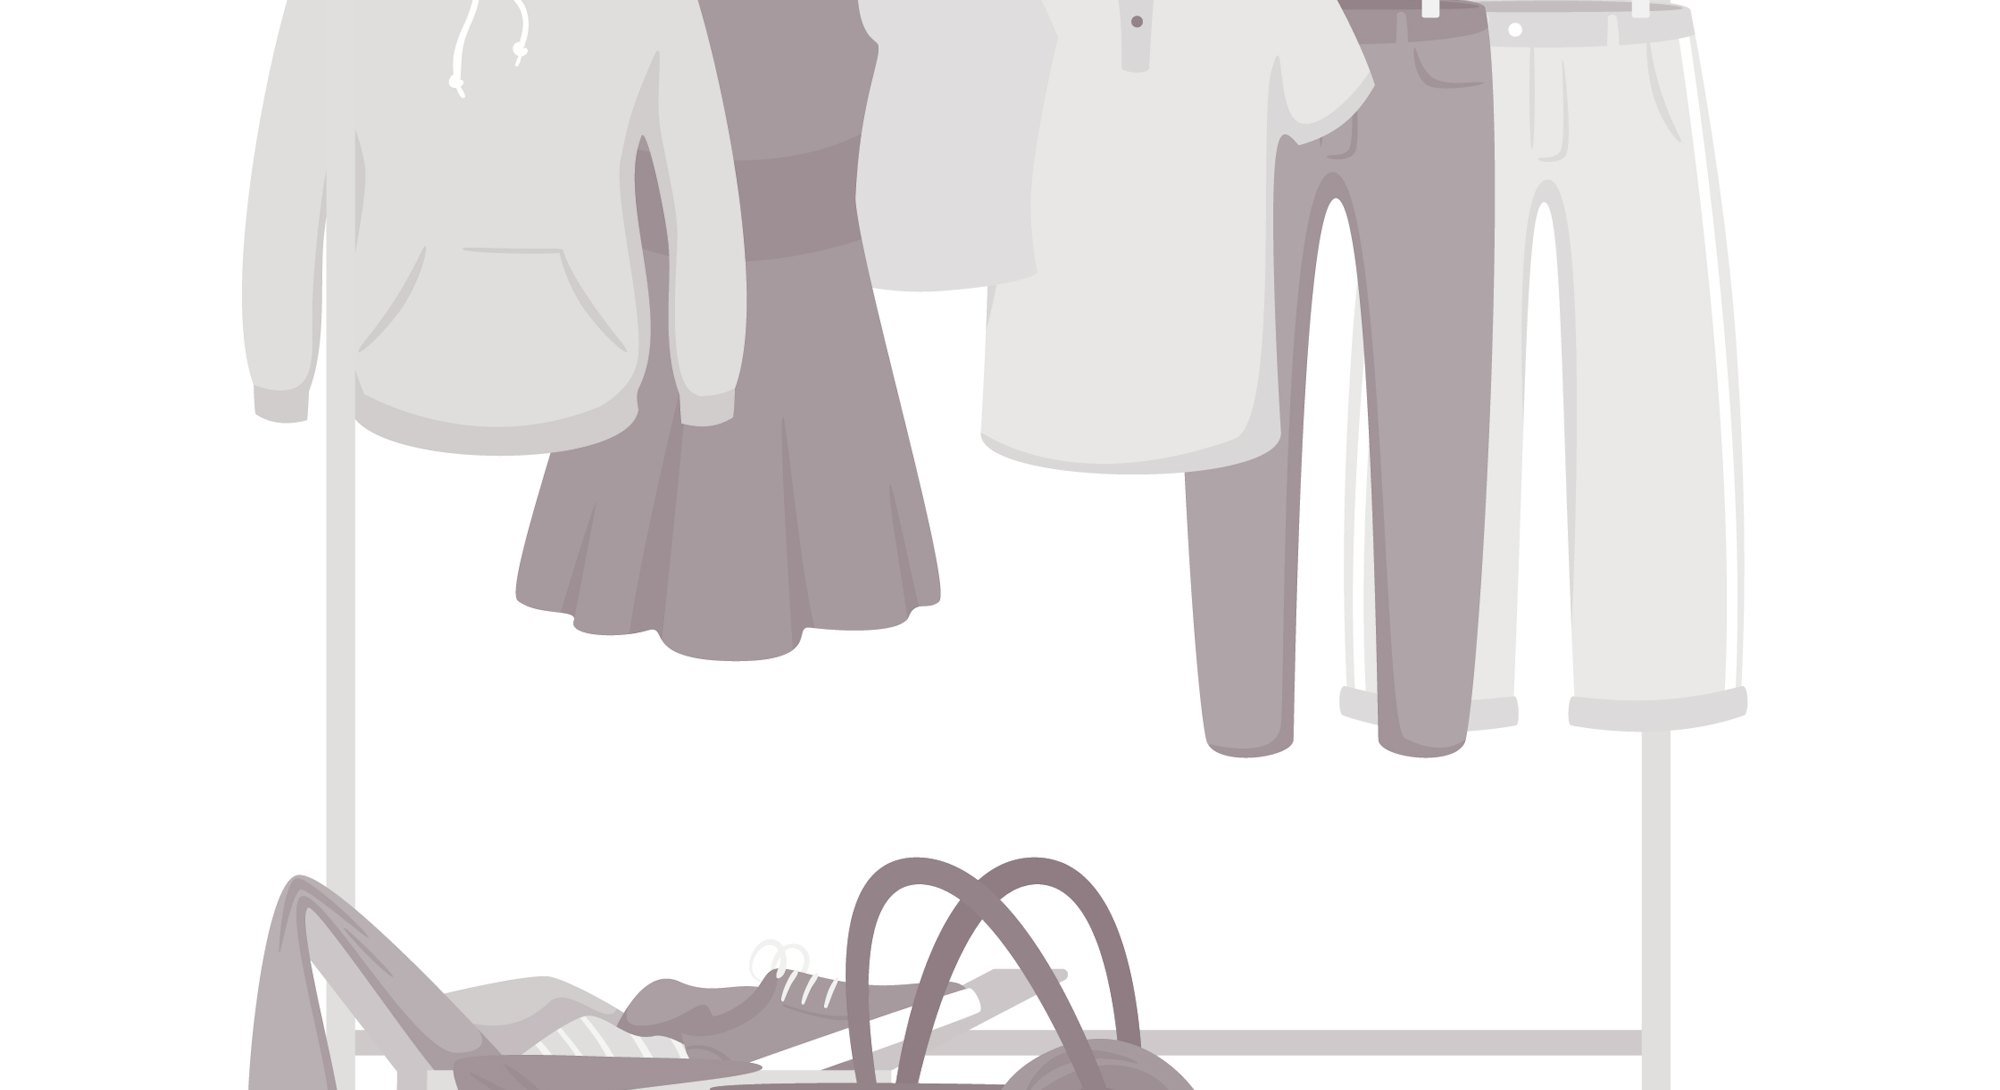 Clothes and accessories hanging on rack vector illustration. Fashion boutique, showroom assortment. ...